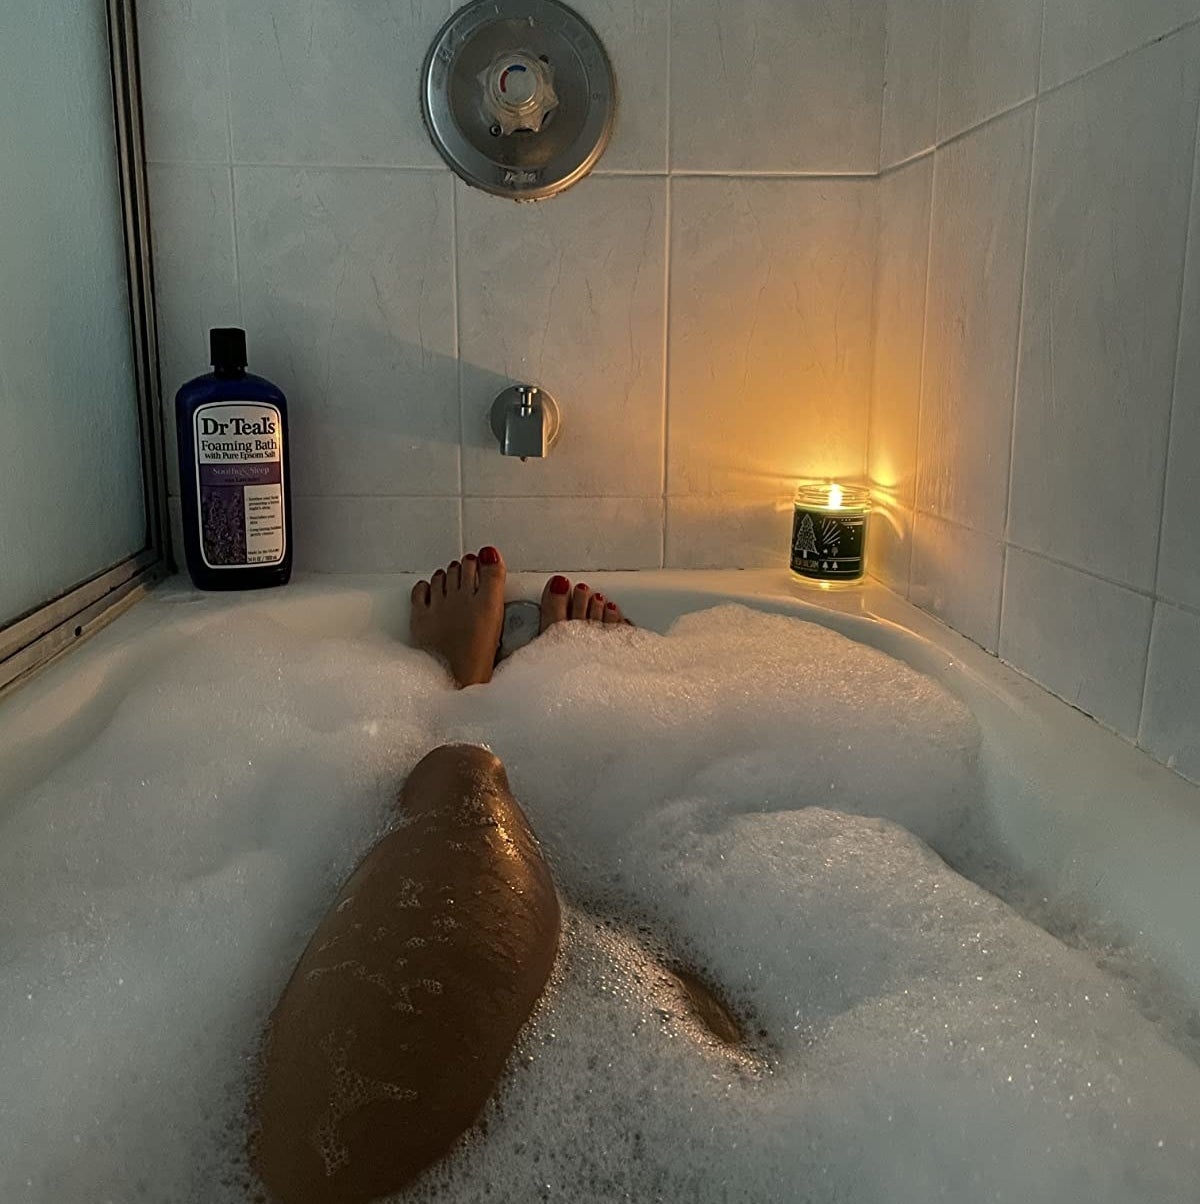 Reviewer in a bubble bath with a bottle of Dr Teal&#x27;s on display on the edge of the tub